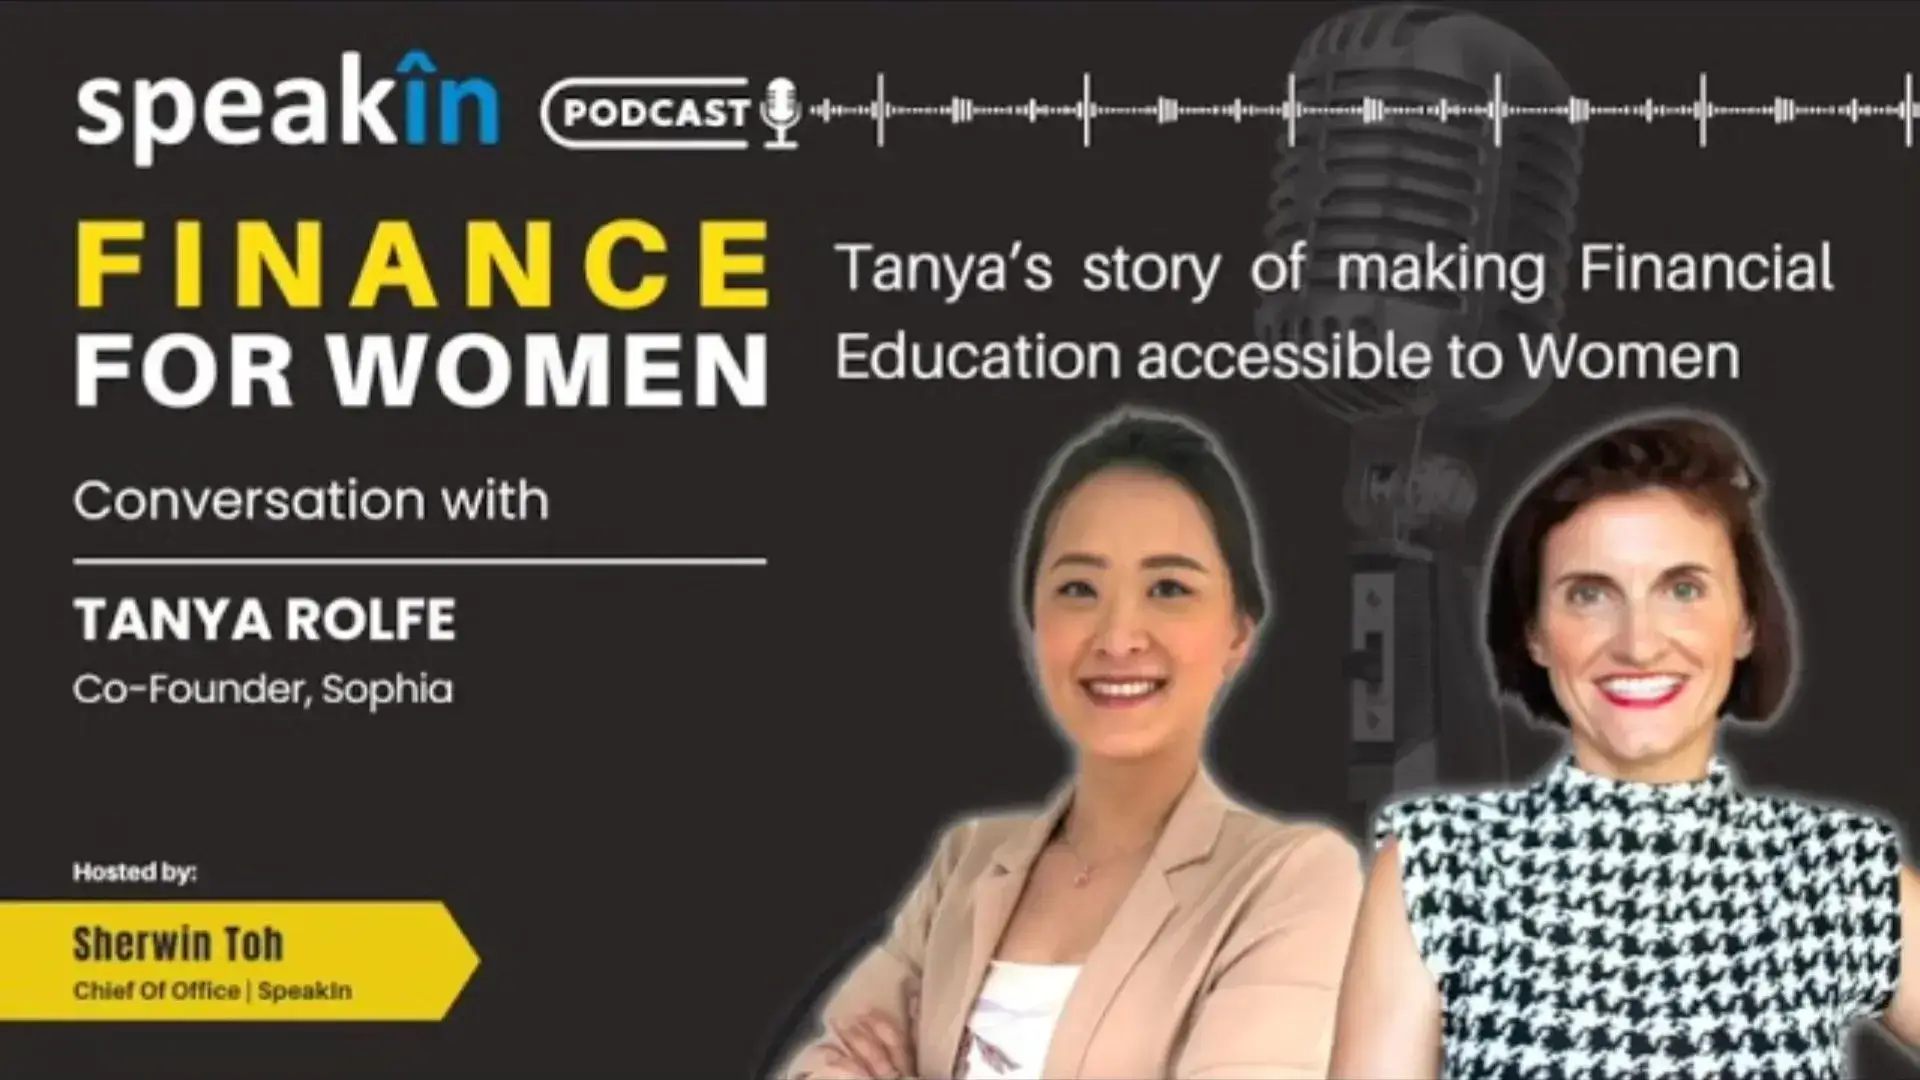 Find a Coach Podcast: Tanya Rolfe talks about Finance for Women